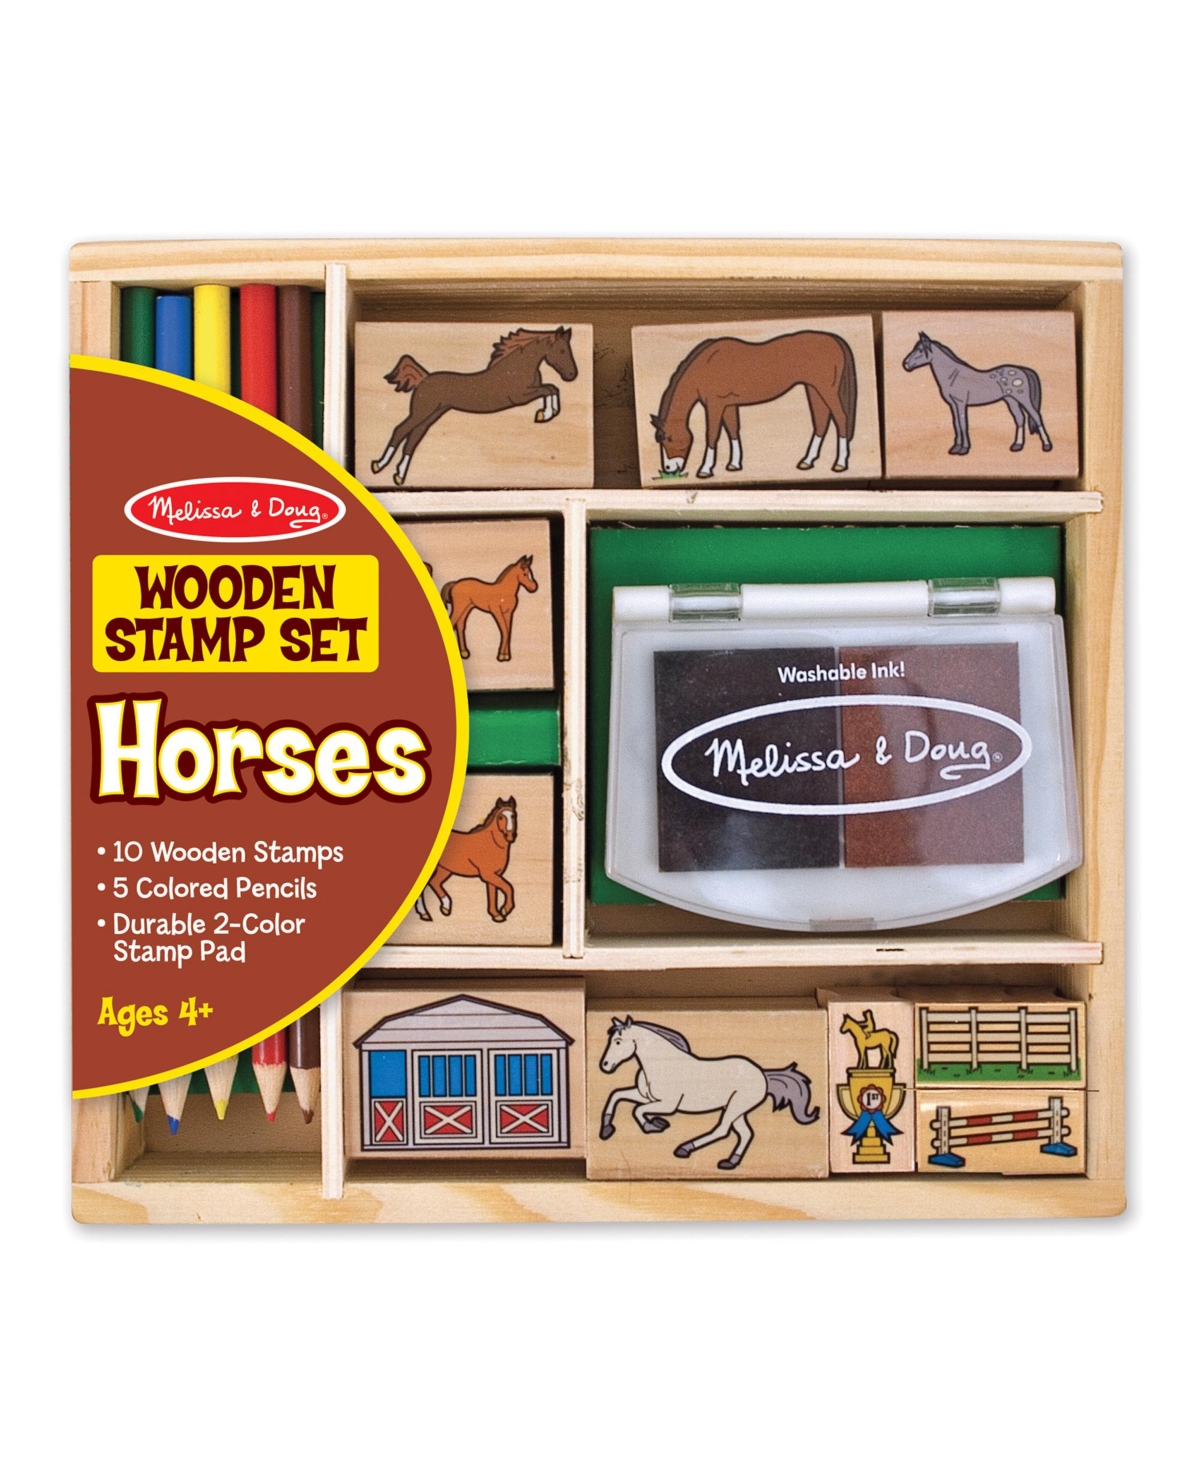 Melissa & Doug Wooden Stamp Activity Set: Horse Stable - 10 Stamps, 5 Colored Pencils, 2-Color Stamp Pad - Multi